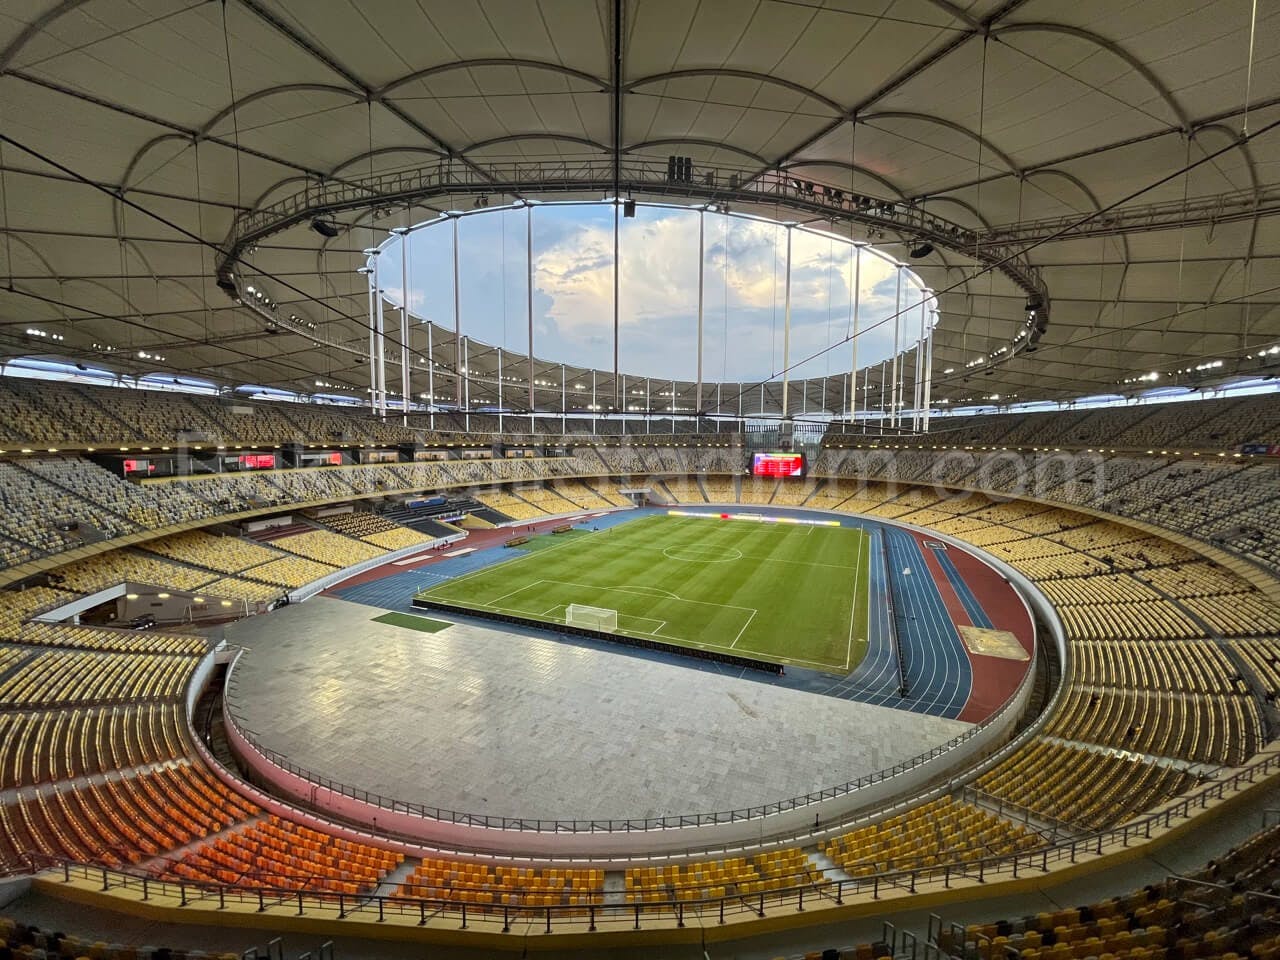 0.5x View of Bukit Jalil field from section 321 of Stadium Bukit Jalil.